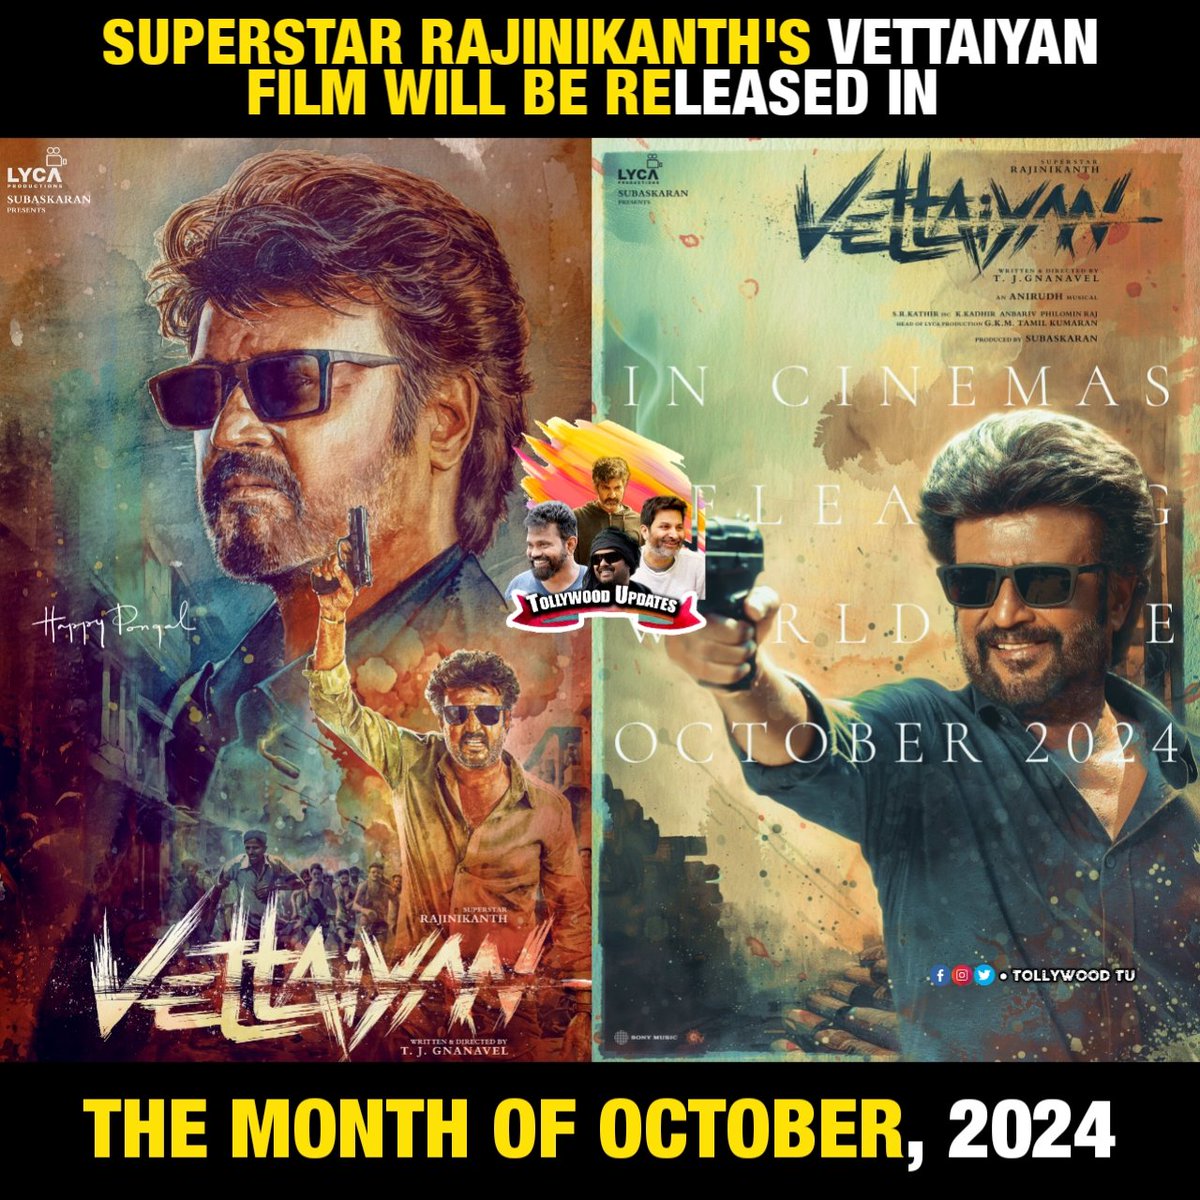 #Vettaiyan to release in the month of October. #Rajinikanth